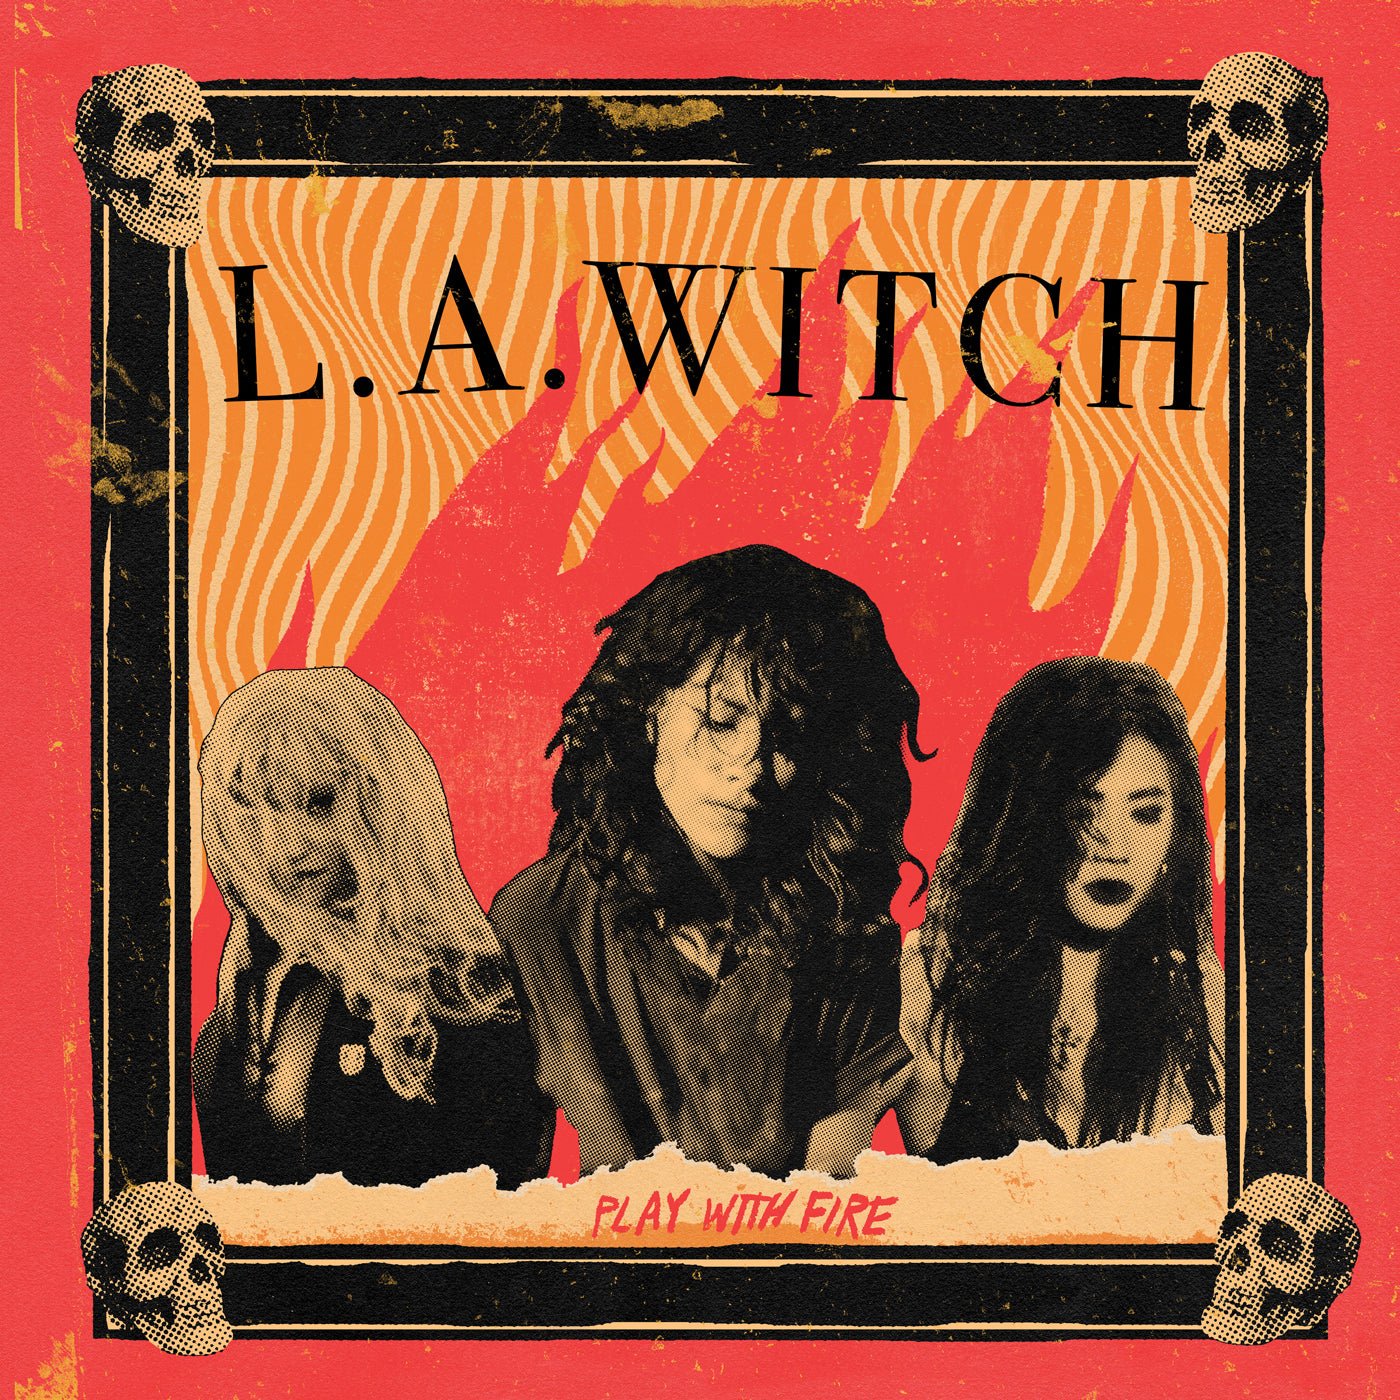 L.A. Witch - Play With Fire (180 Gram, Gold Vinyl) - 803238089614 - LP's - Yellow Racket Records